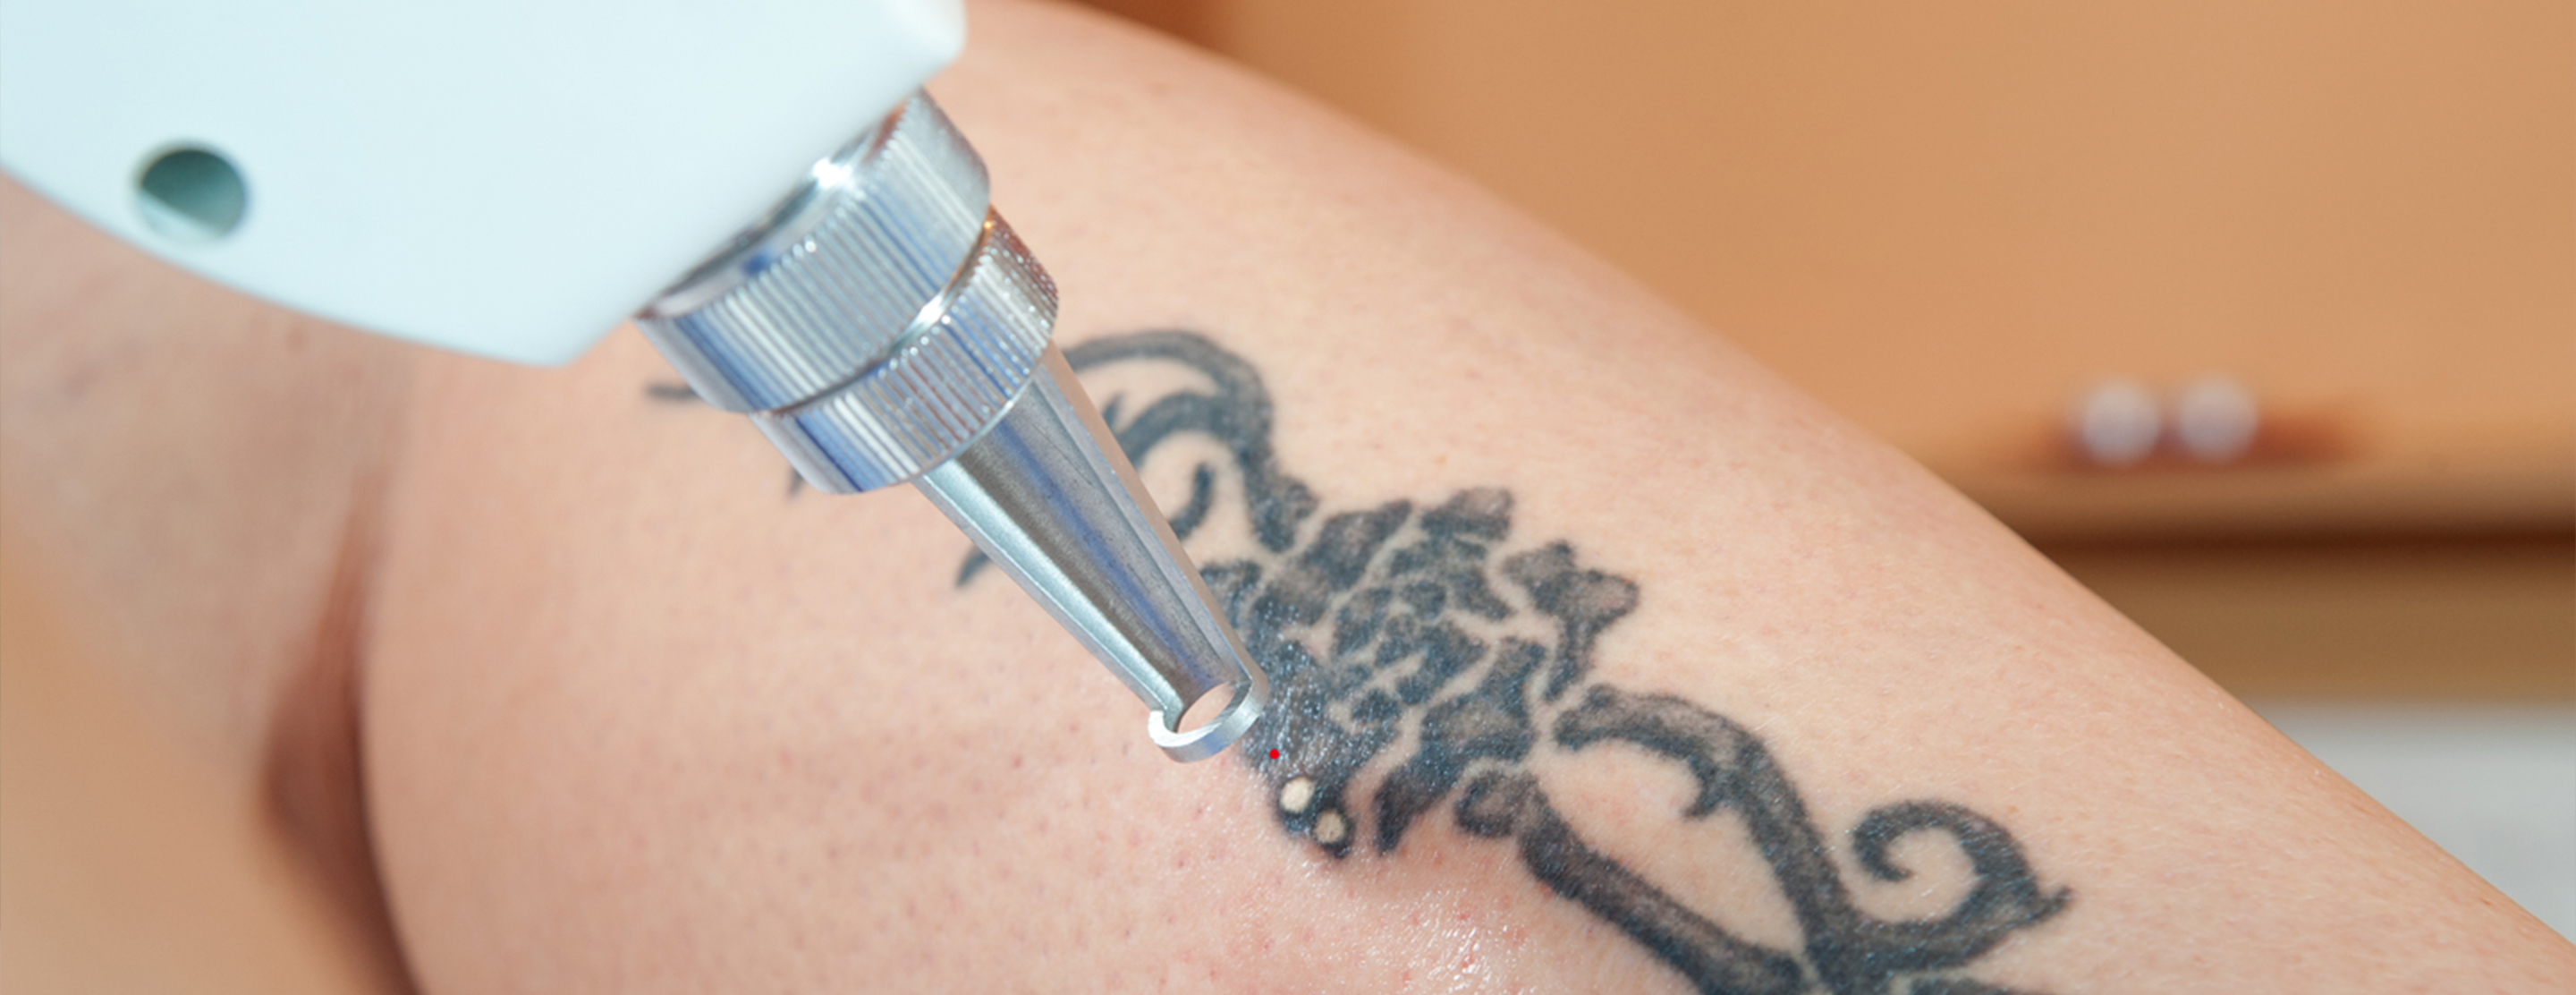 Verruciform Plaques Within a Tattoo of an HIVPositive Patient  MDedge  Dermatology